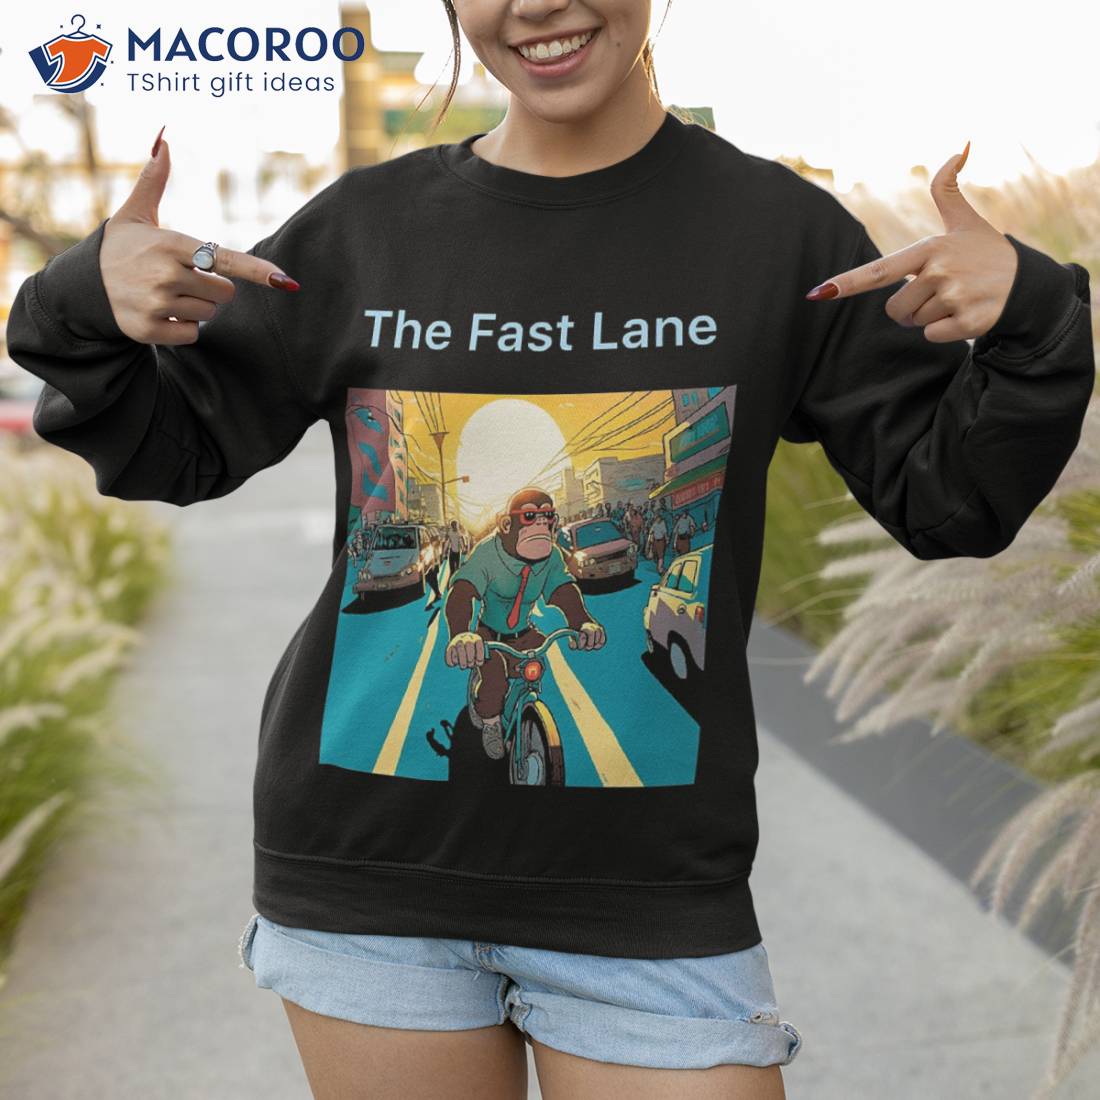 Top Lane T-Shirts for Sale